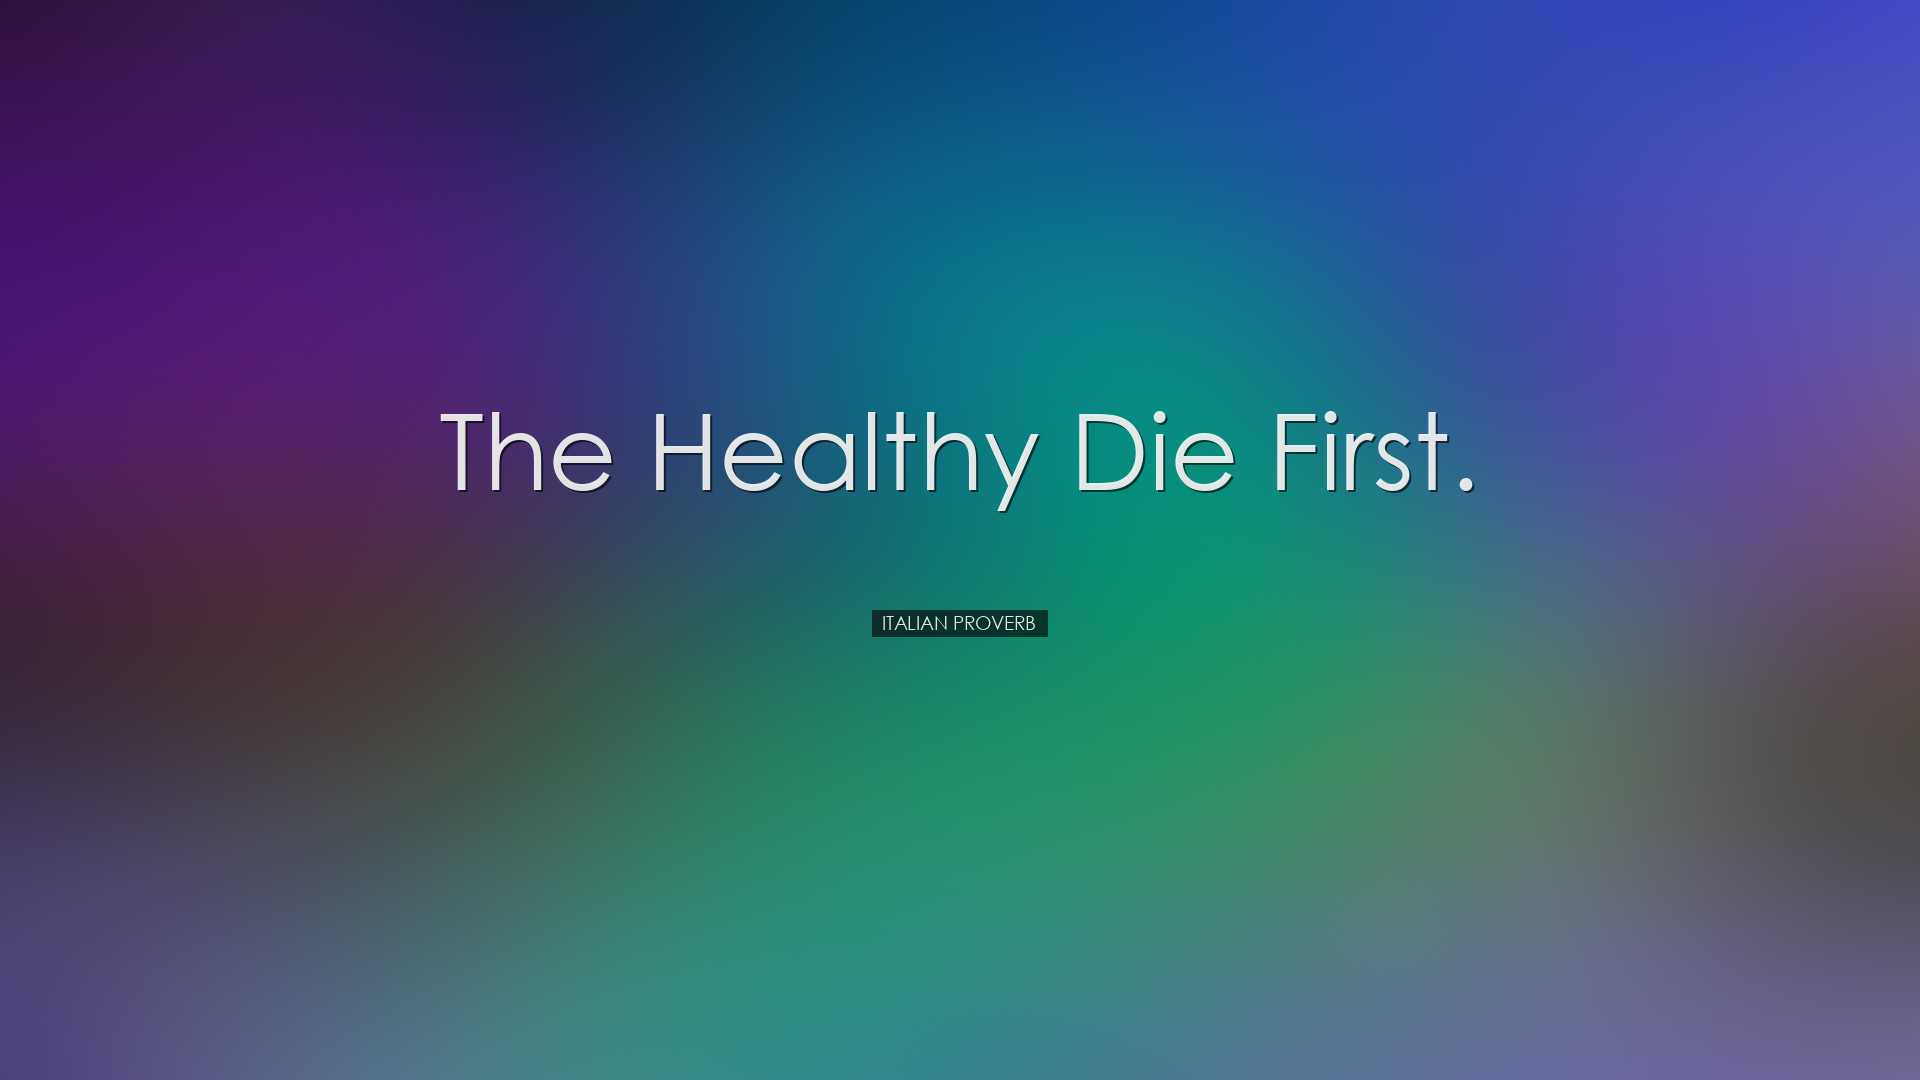 The healthy die first. - Italian Proverb